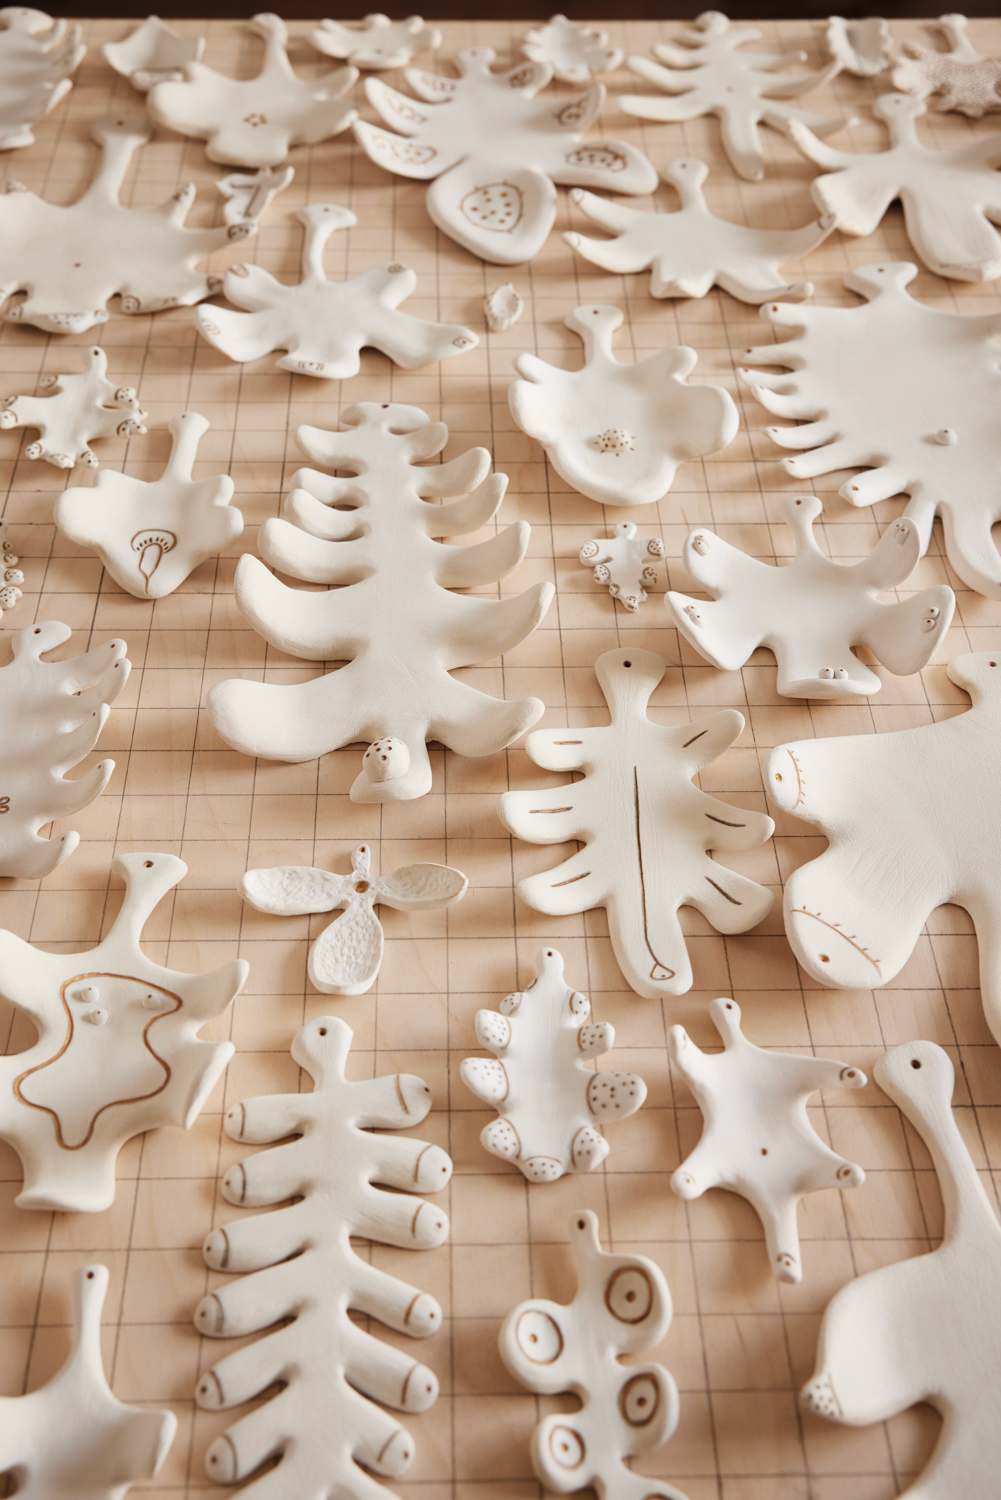 Porcelain leaves laying on a wooden panel.